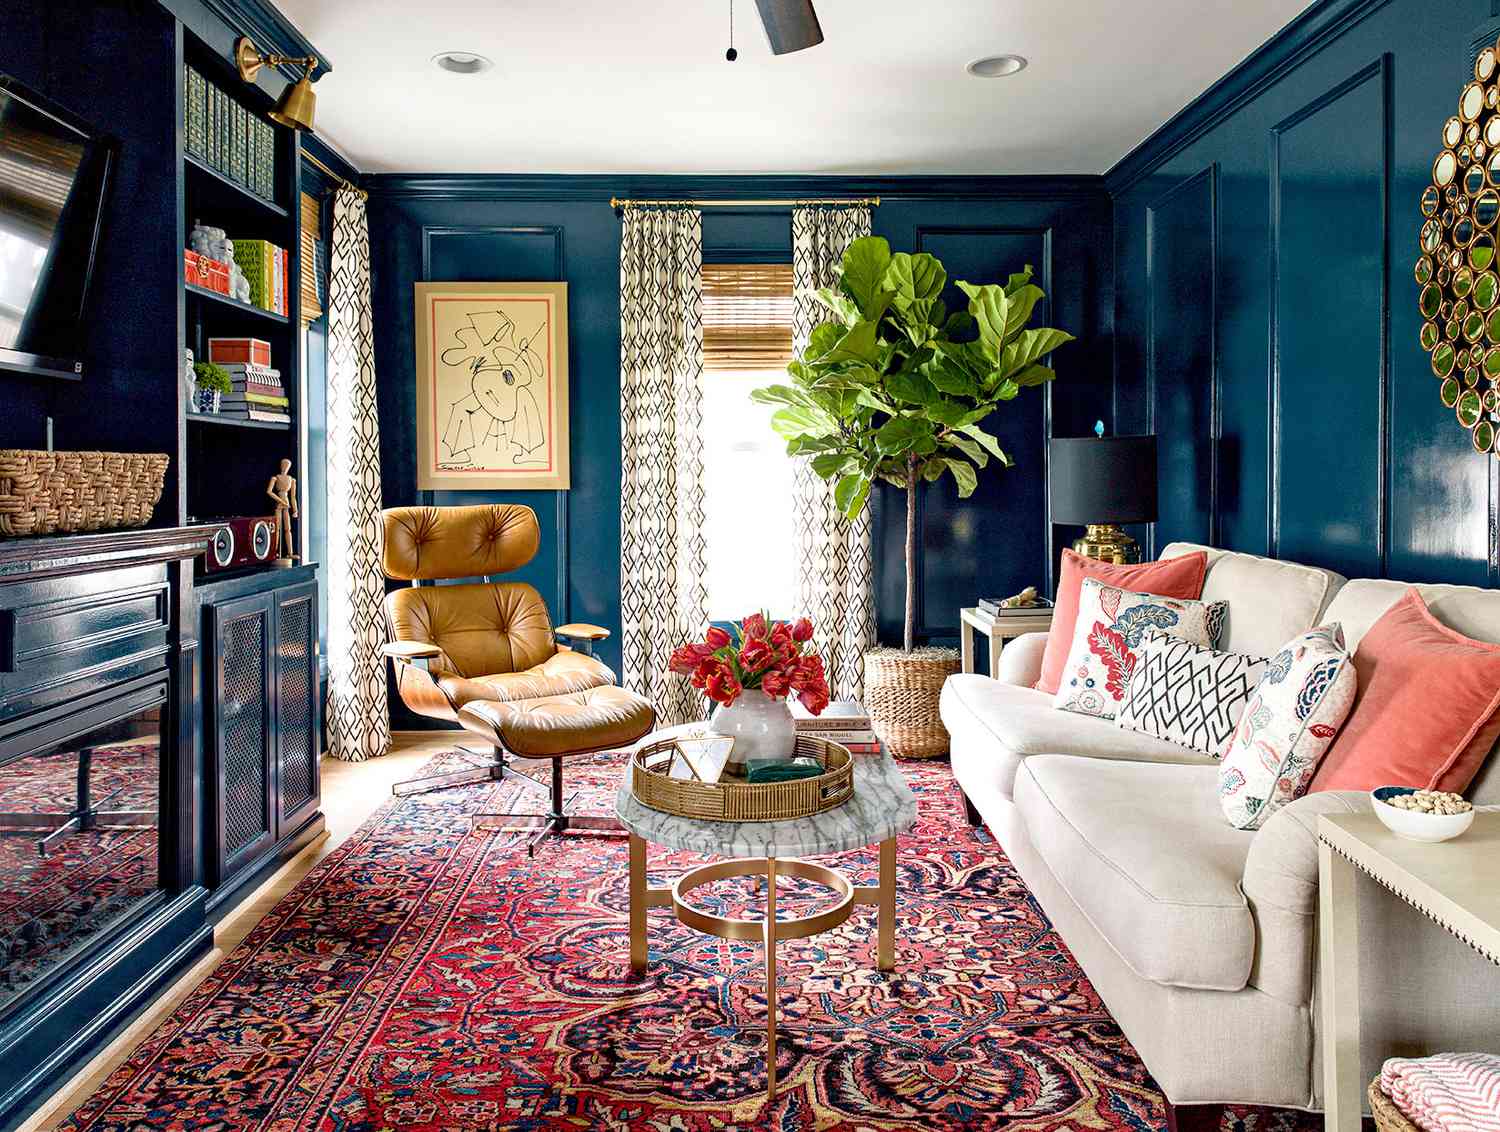 Living room with patterned rug and blue walls